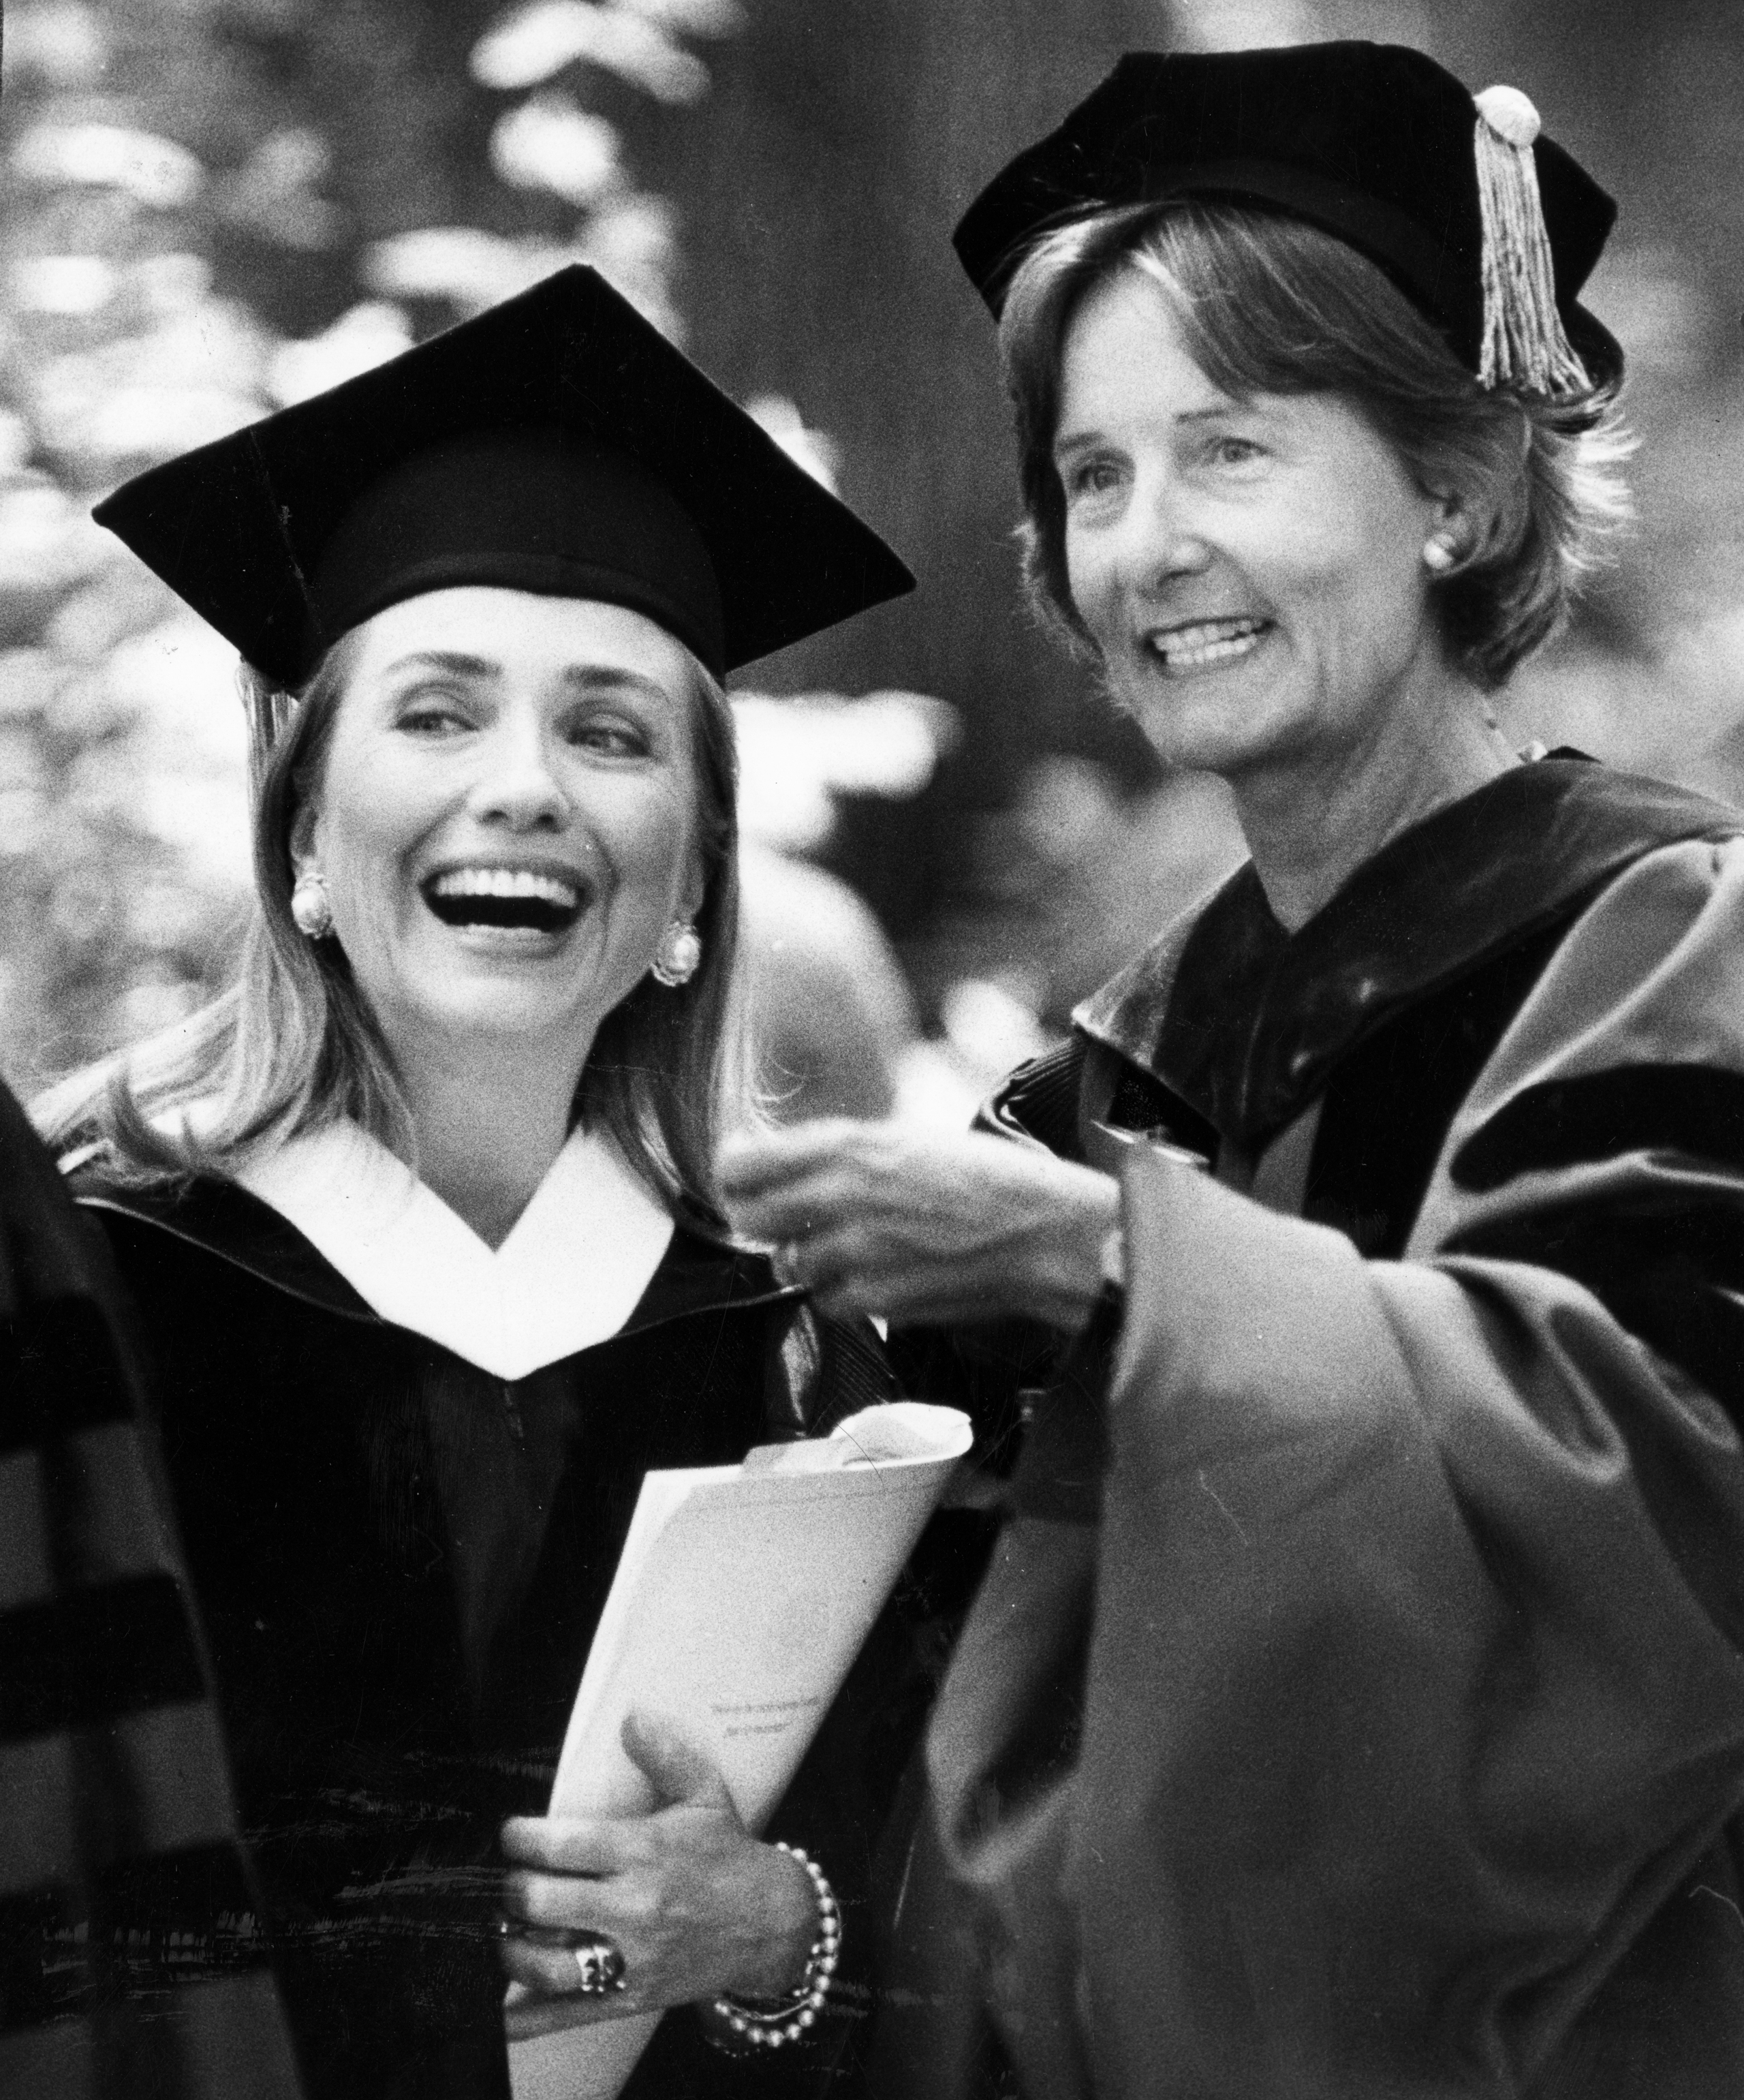 Hillary Clinton, right, and Wellesley College's president, Nannerl O. Keohane, share a light moment at commencement in Wellesley, Mass., on May 29, 1992. (David L. Ryan—Boston Globe/Getty Images)